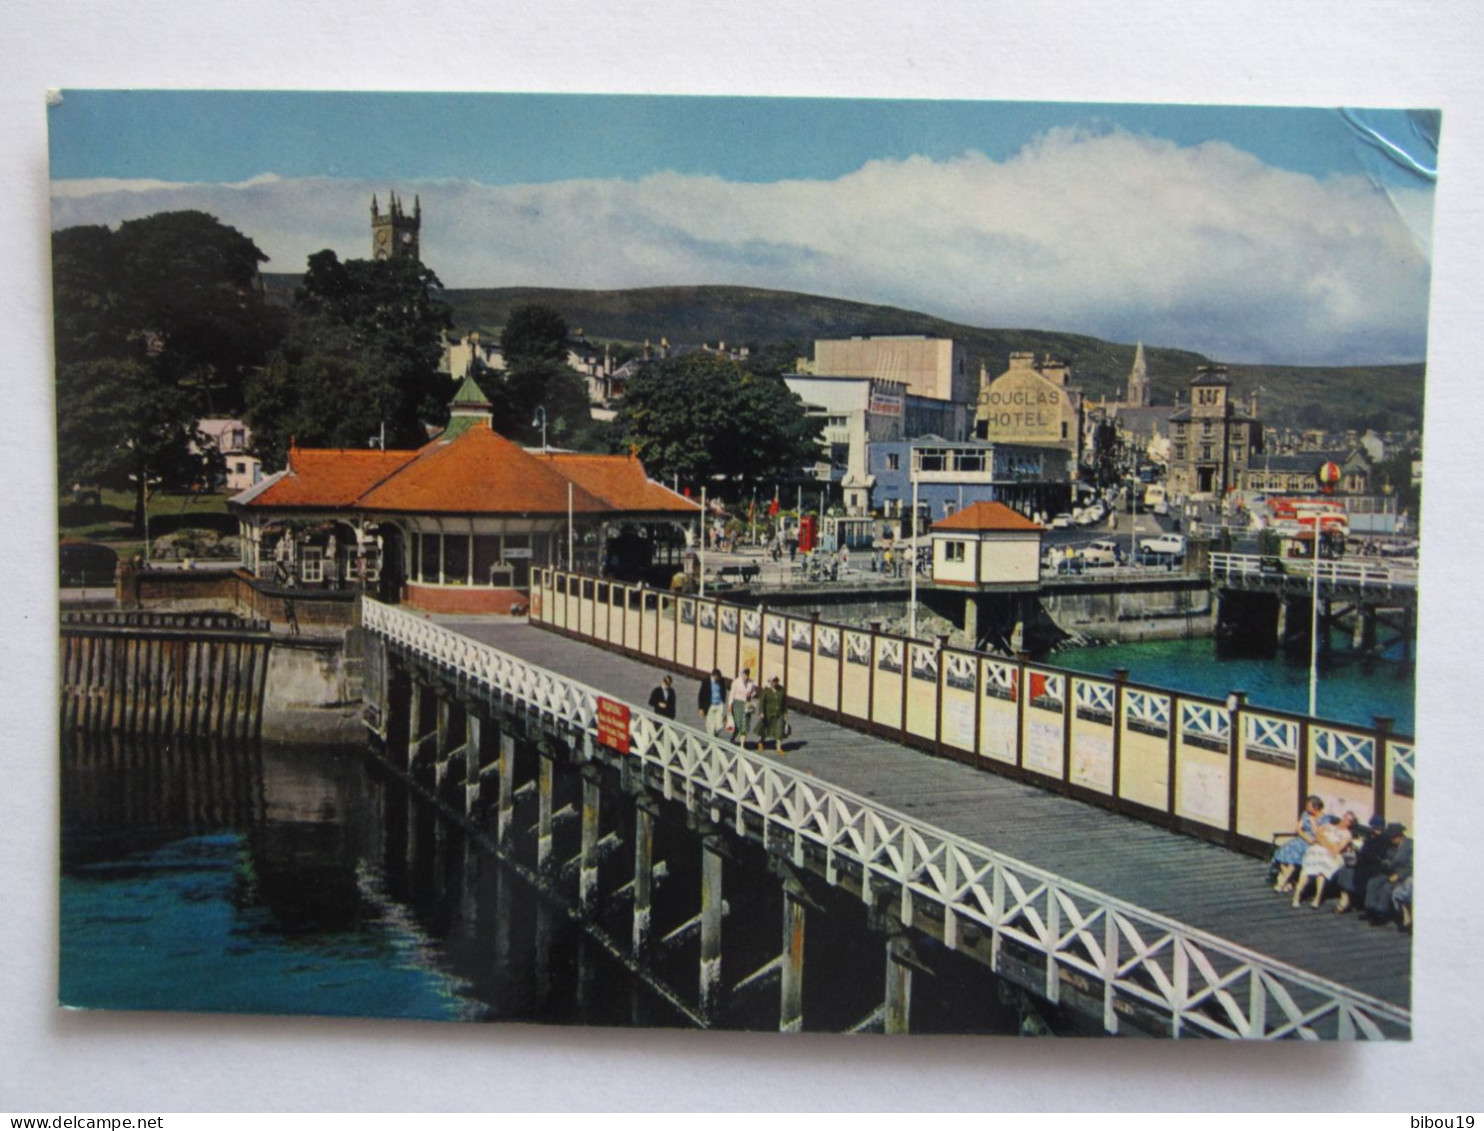 DUNOON FROM THE PIER  ARGYLL - Argyllshire